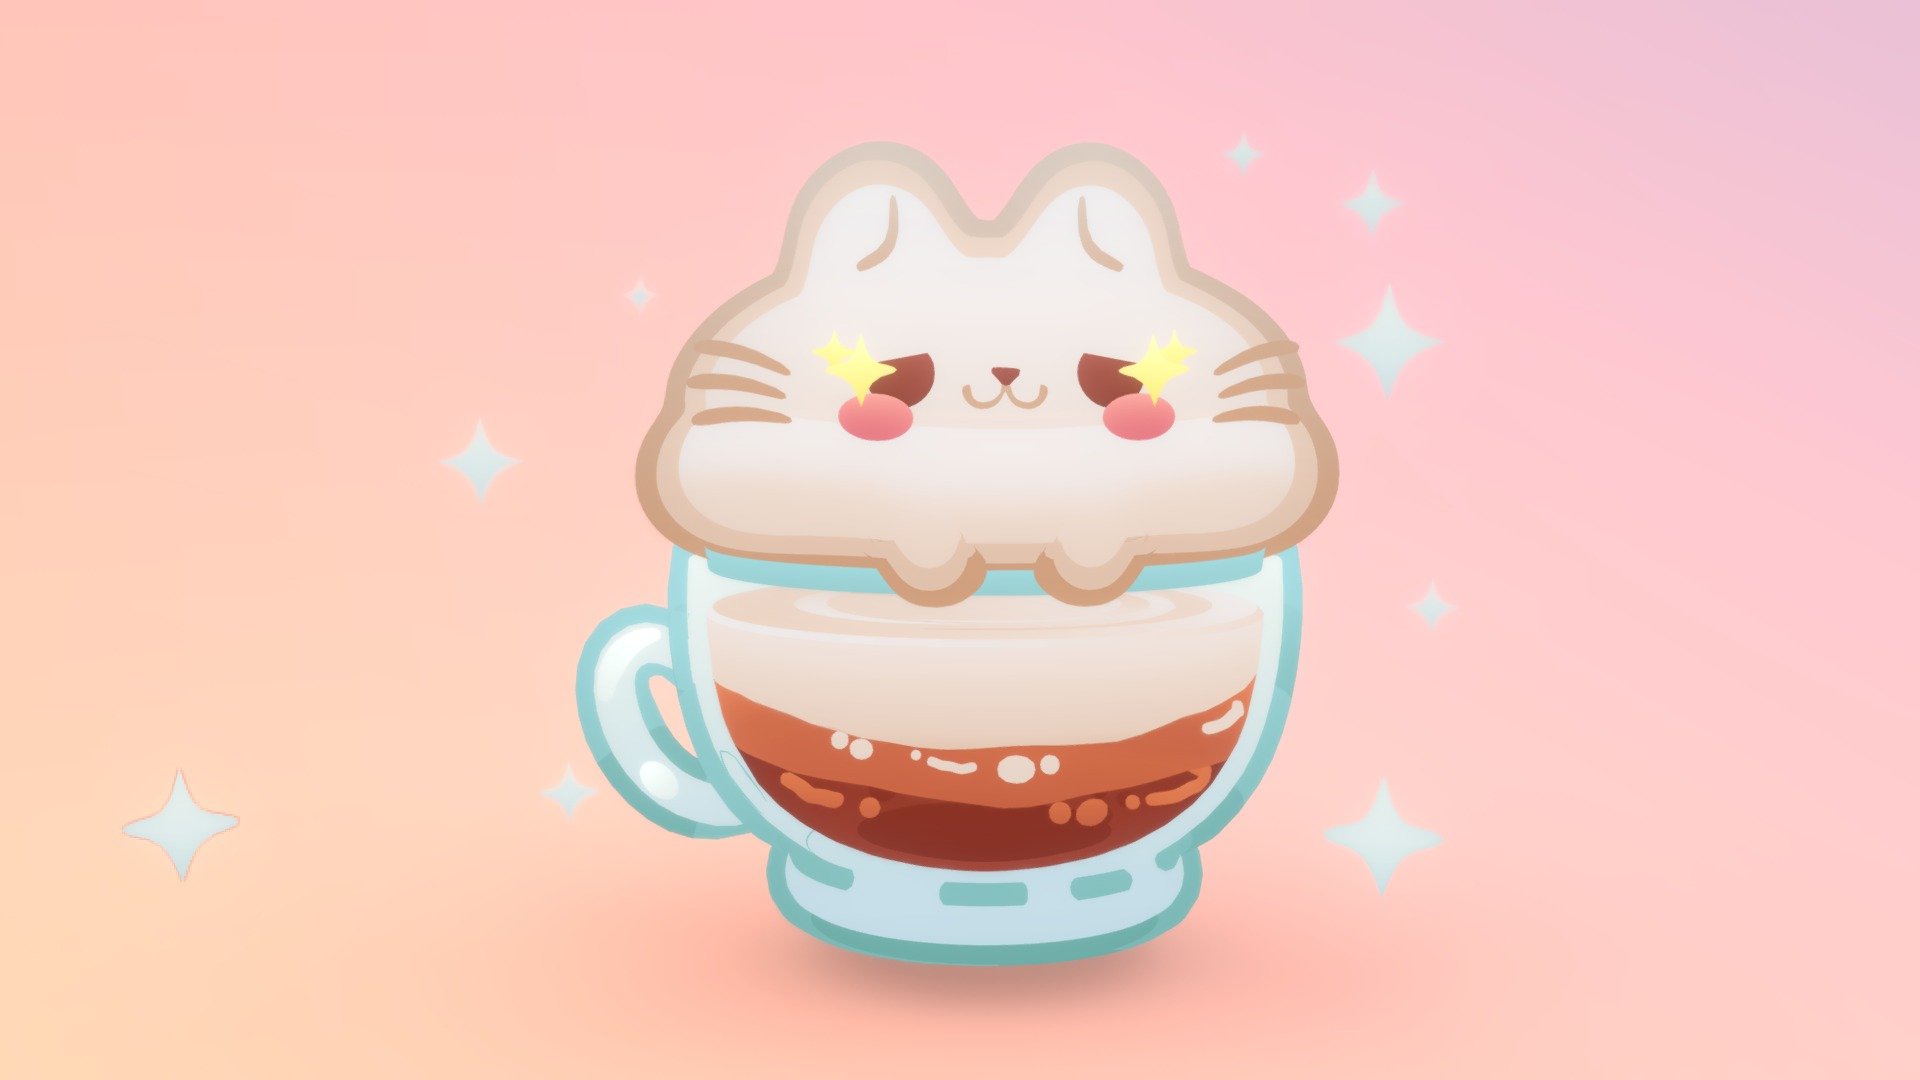 cute unlit  coffee catpuccino

Textured with gradient atlas

Like a few of my other assets in the same style, it uses a single texture diffuse map and is mapped using only color gradients. 
All gradient textures can be extended and combined to a large atlas.

There are more assets in this style to add to your game scene or environment. Check out my sale 3d model